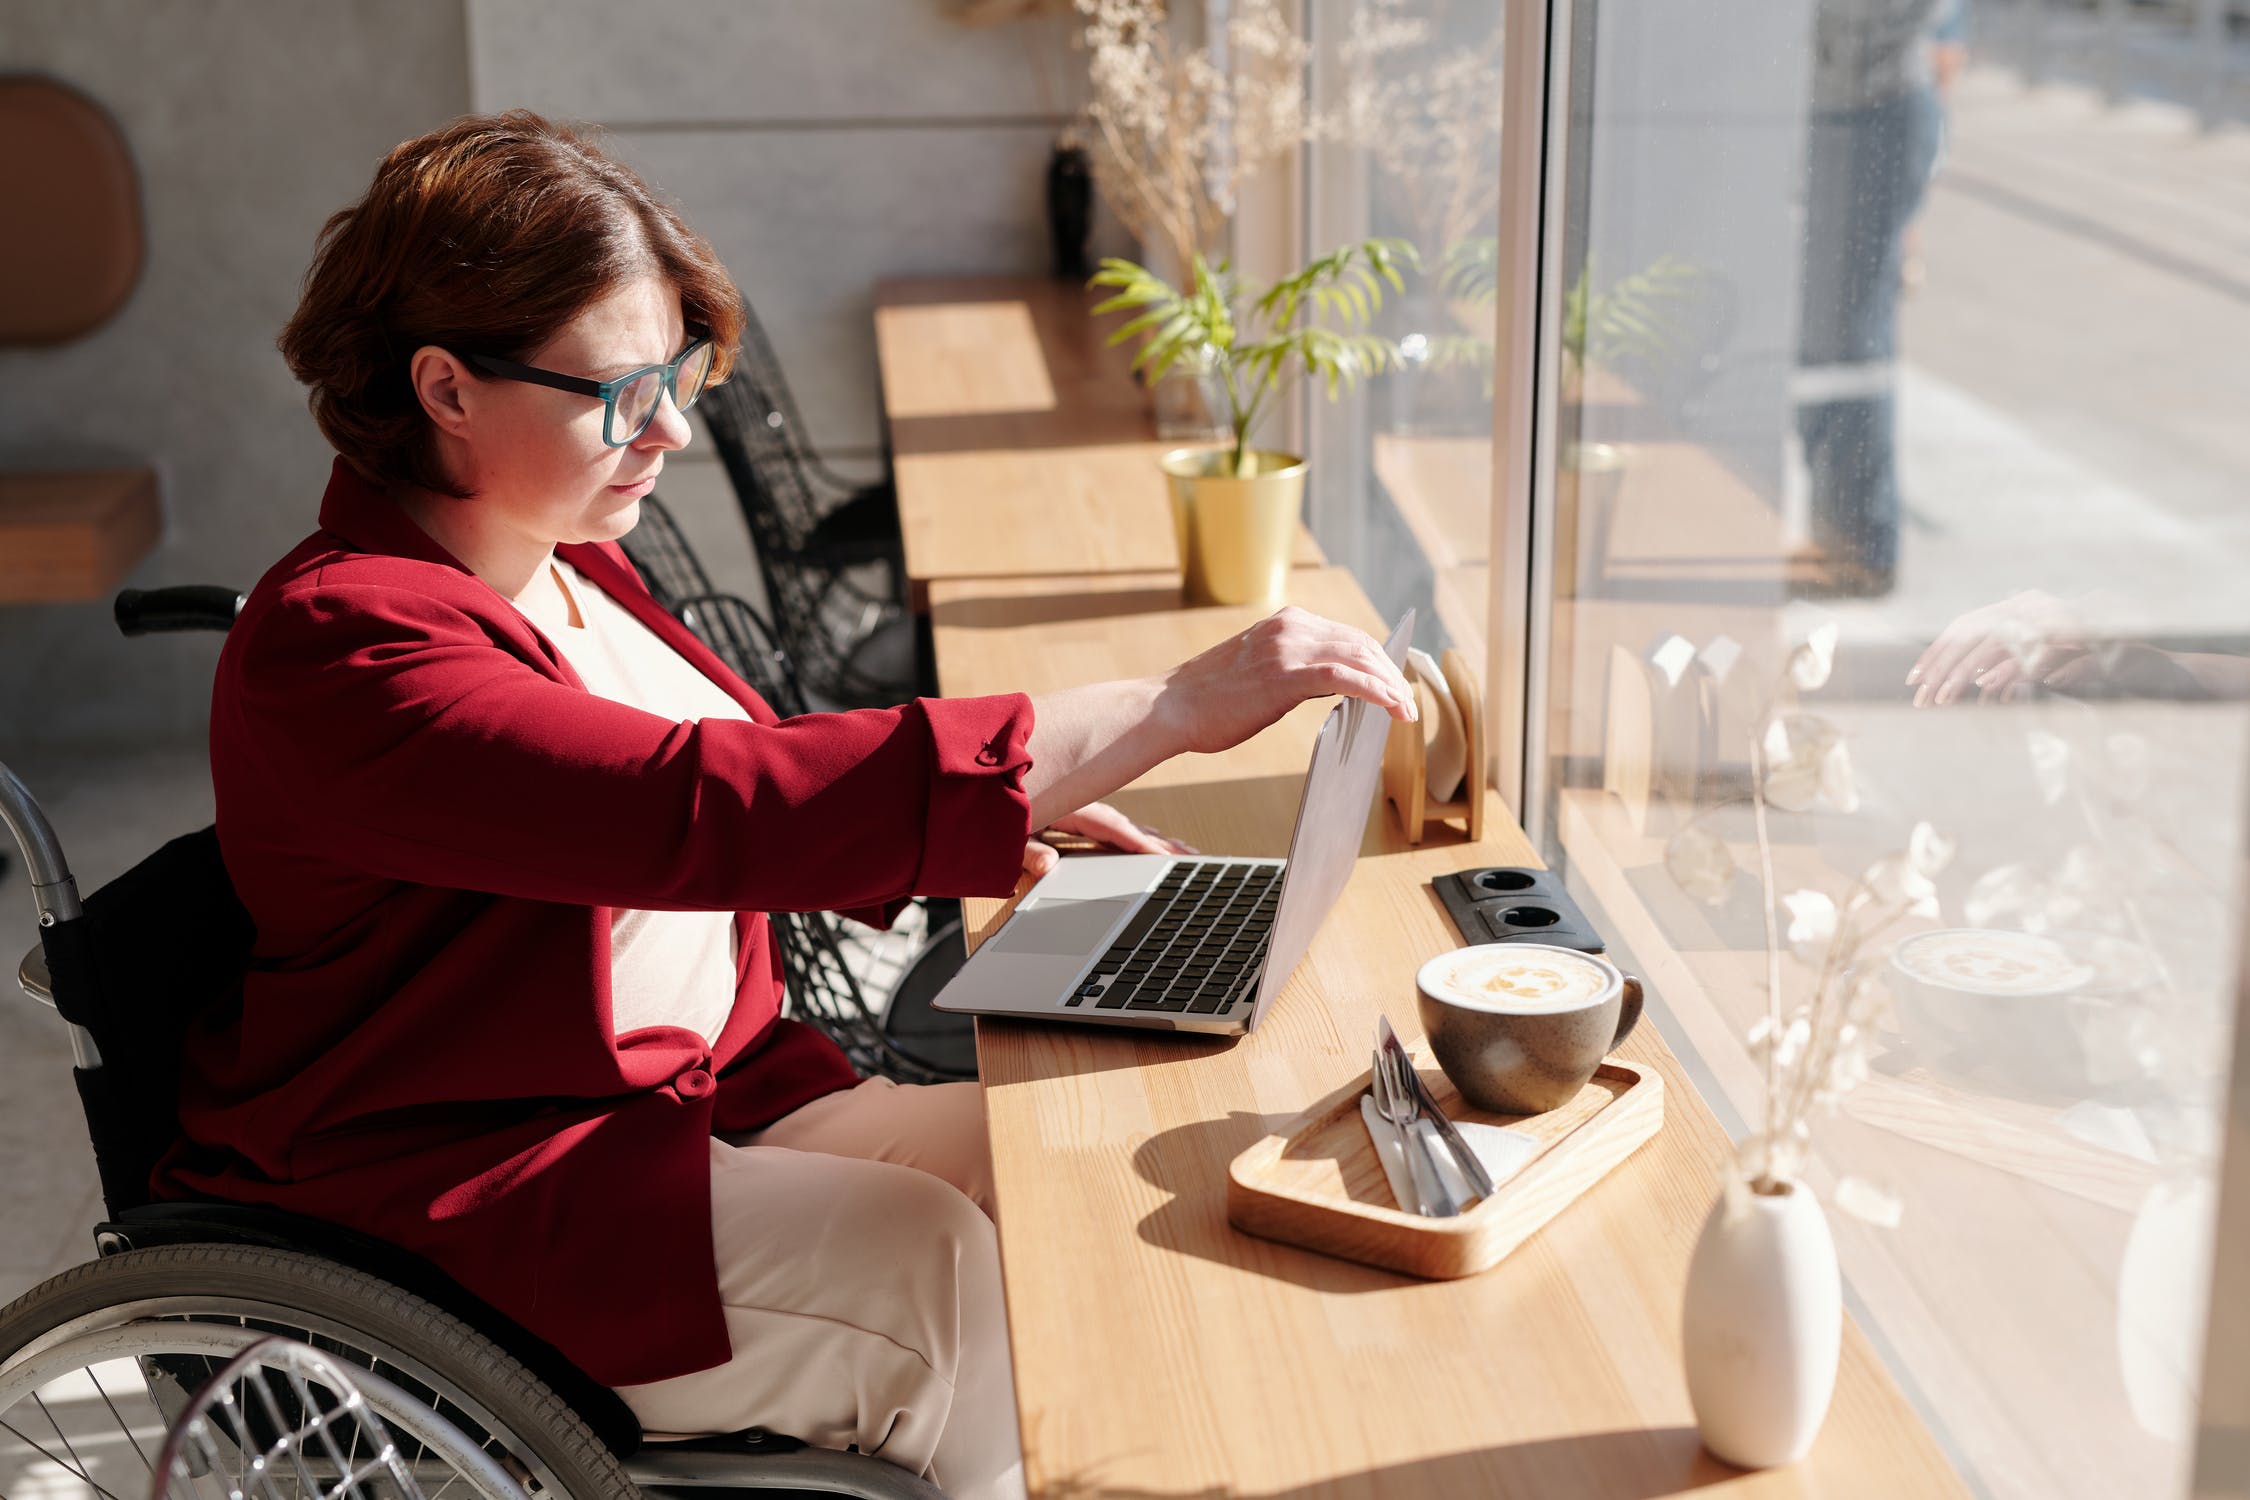 How to Make Workplaces More Inclusive for People with Disabilities